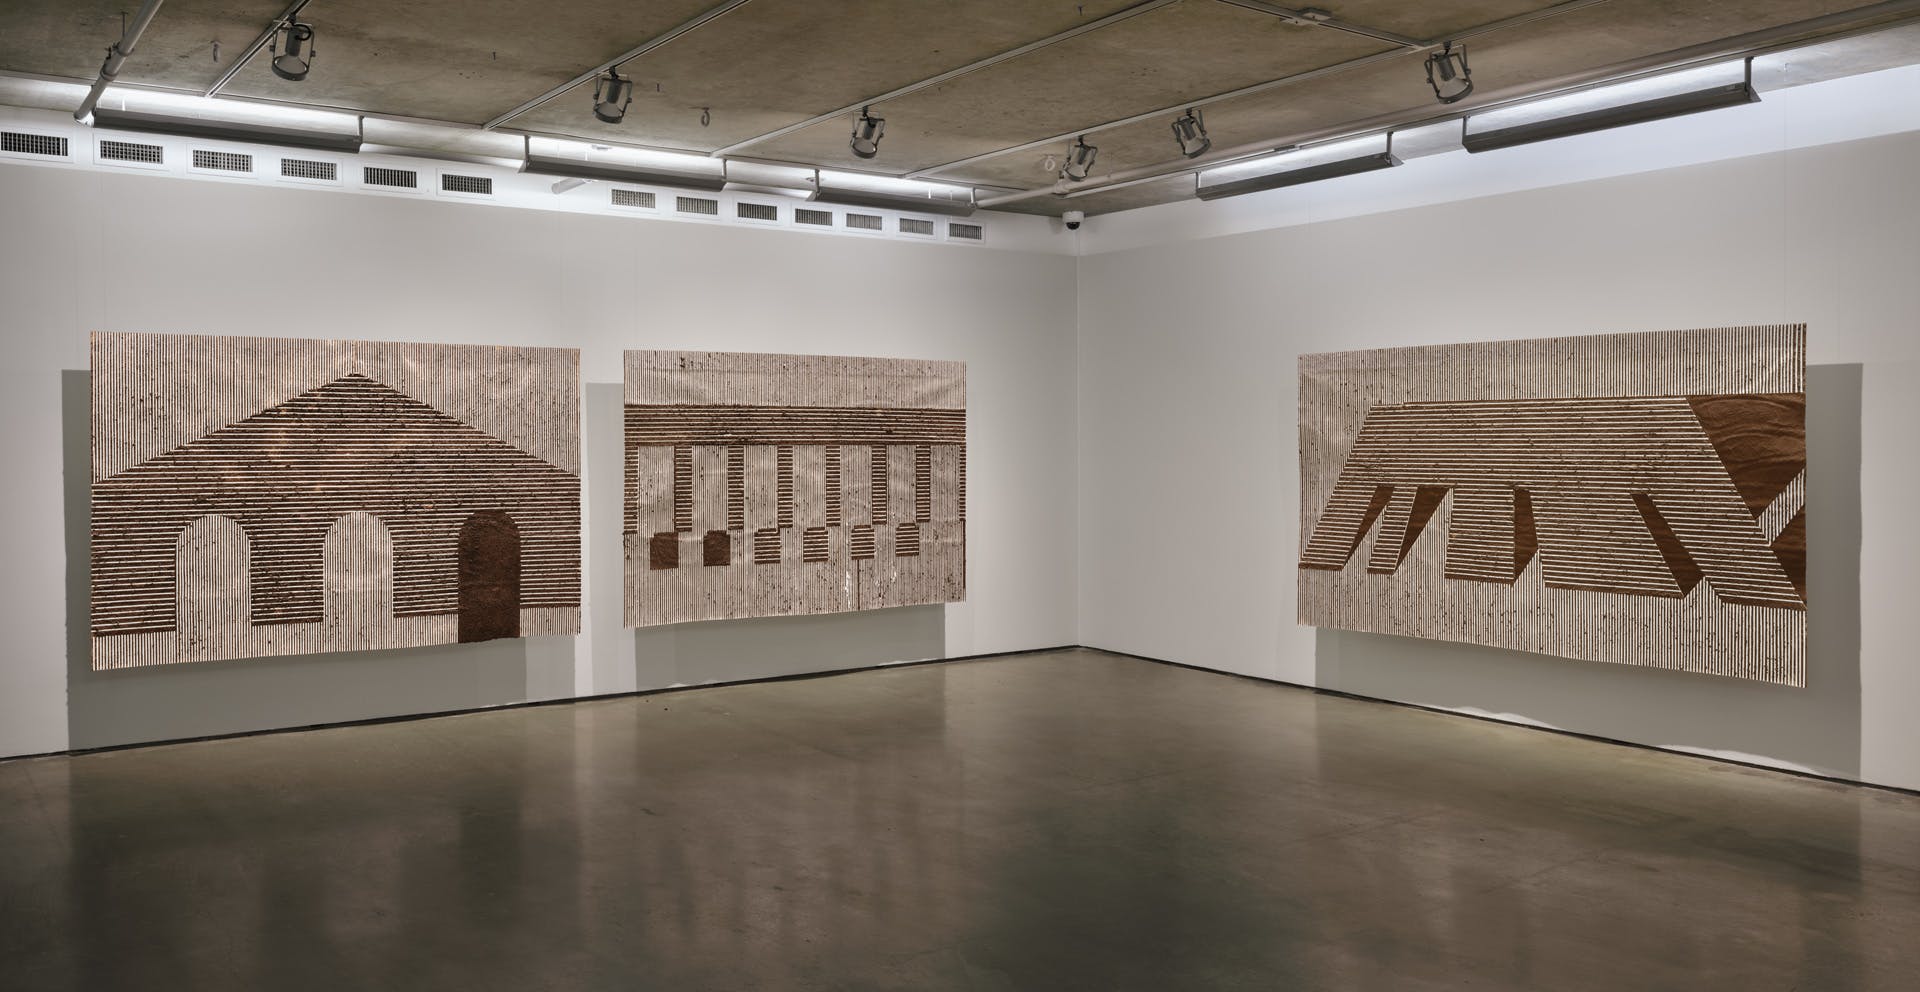 Three large scale drawings are suspended against the two sides of the corner wall of a gallery space. The drawings of architectural forms are made with striations of brown adobe mud on white paper. 